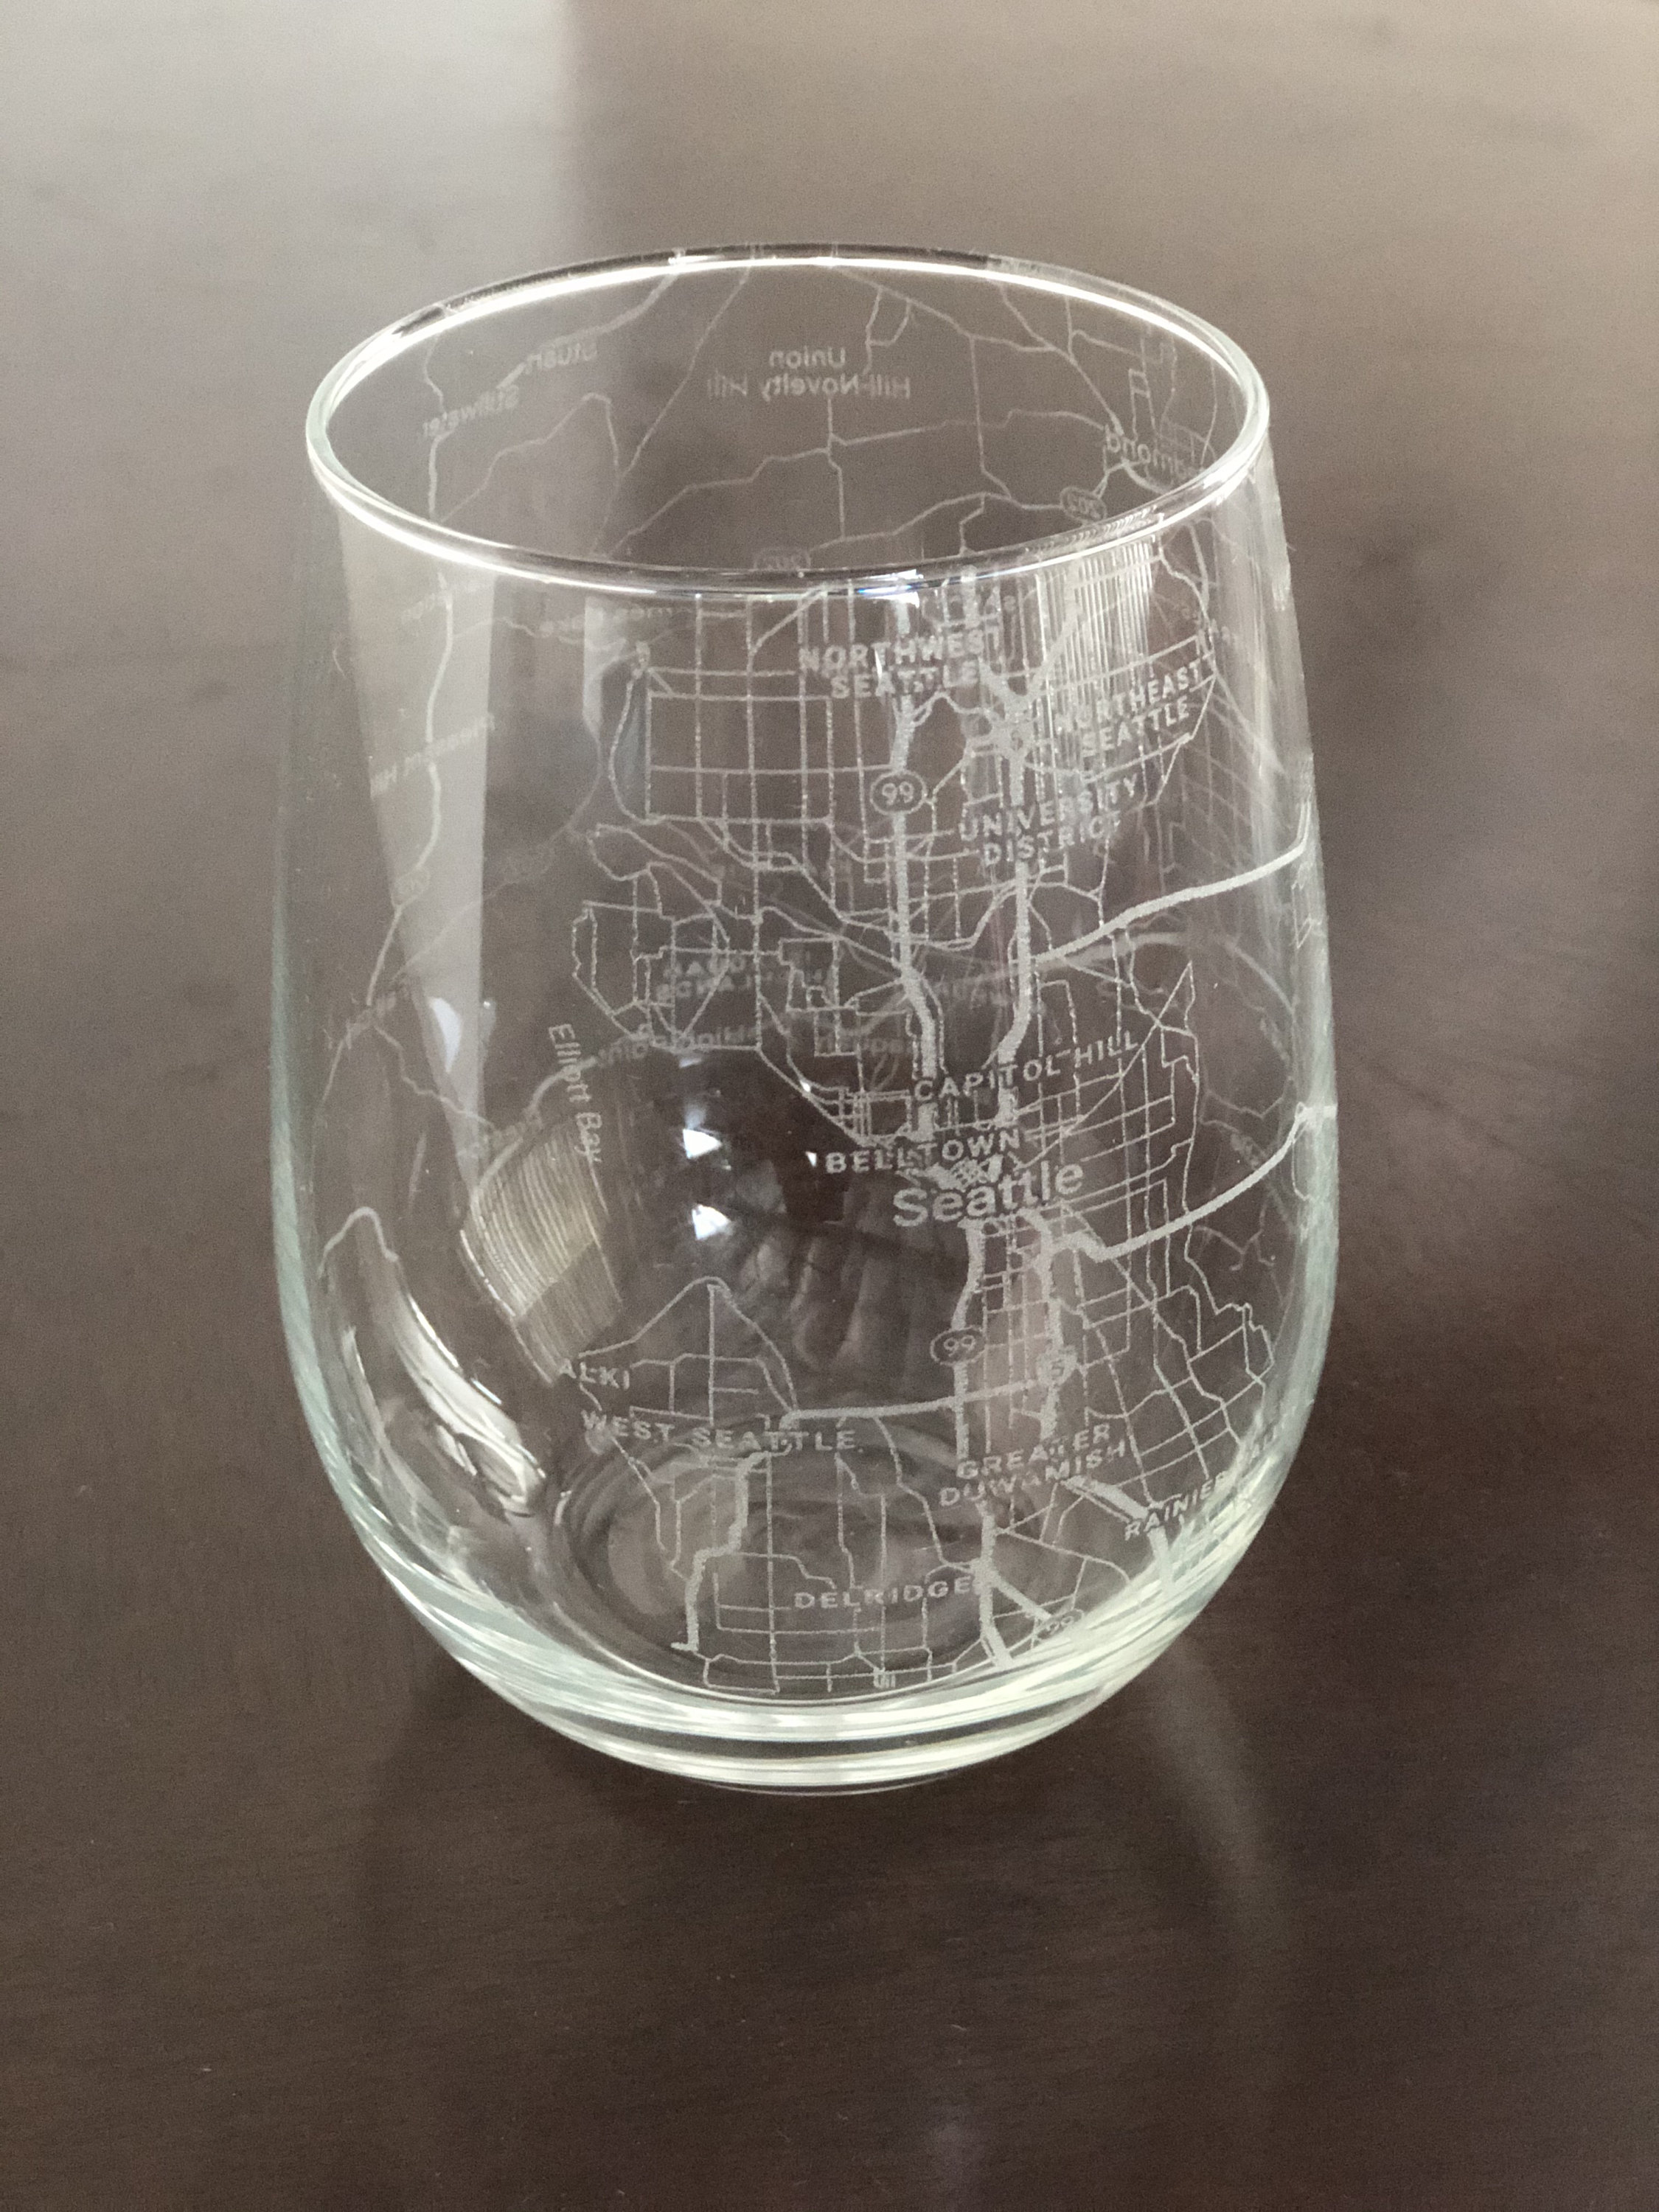 Small Town USA Stemless Wine Glass